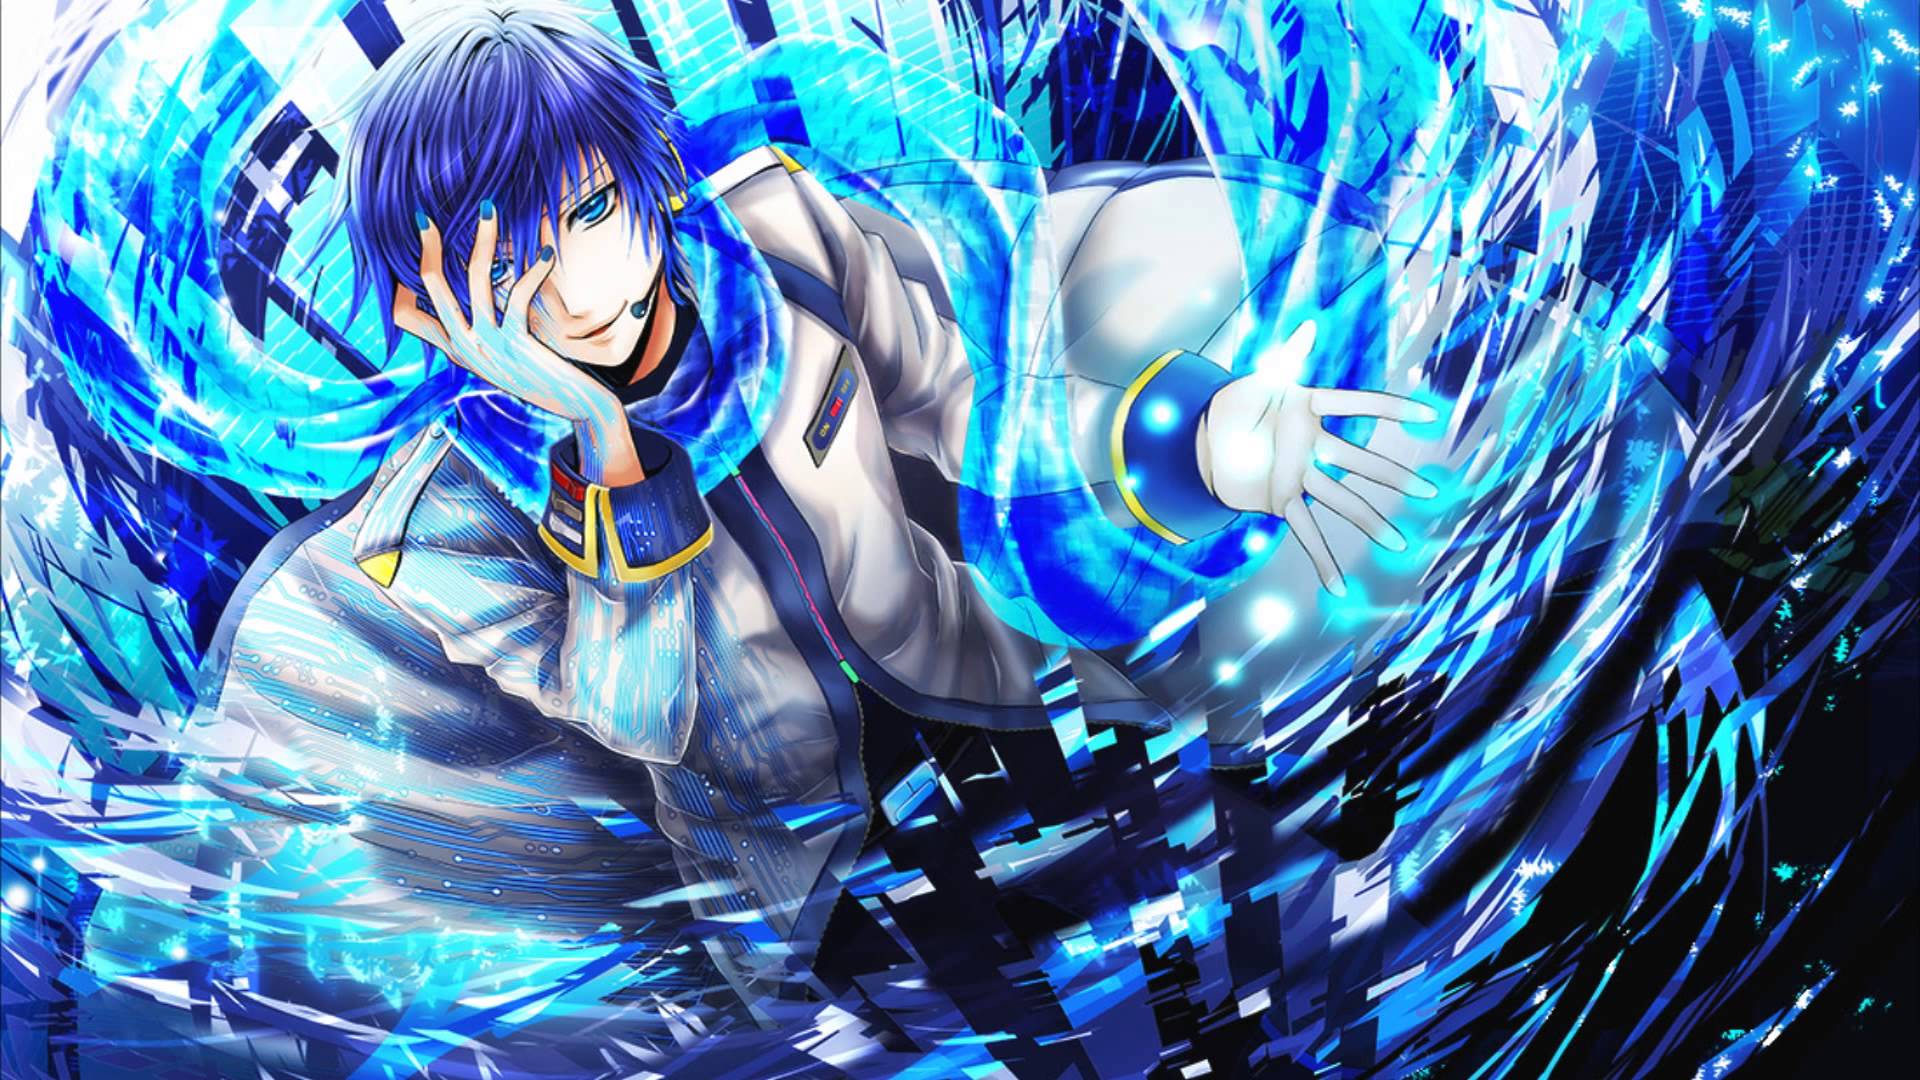 HD Kaito Vocaloid Backgrounds